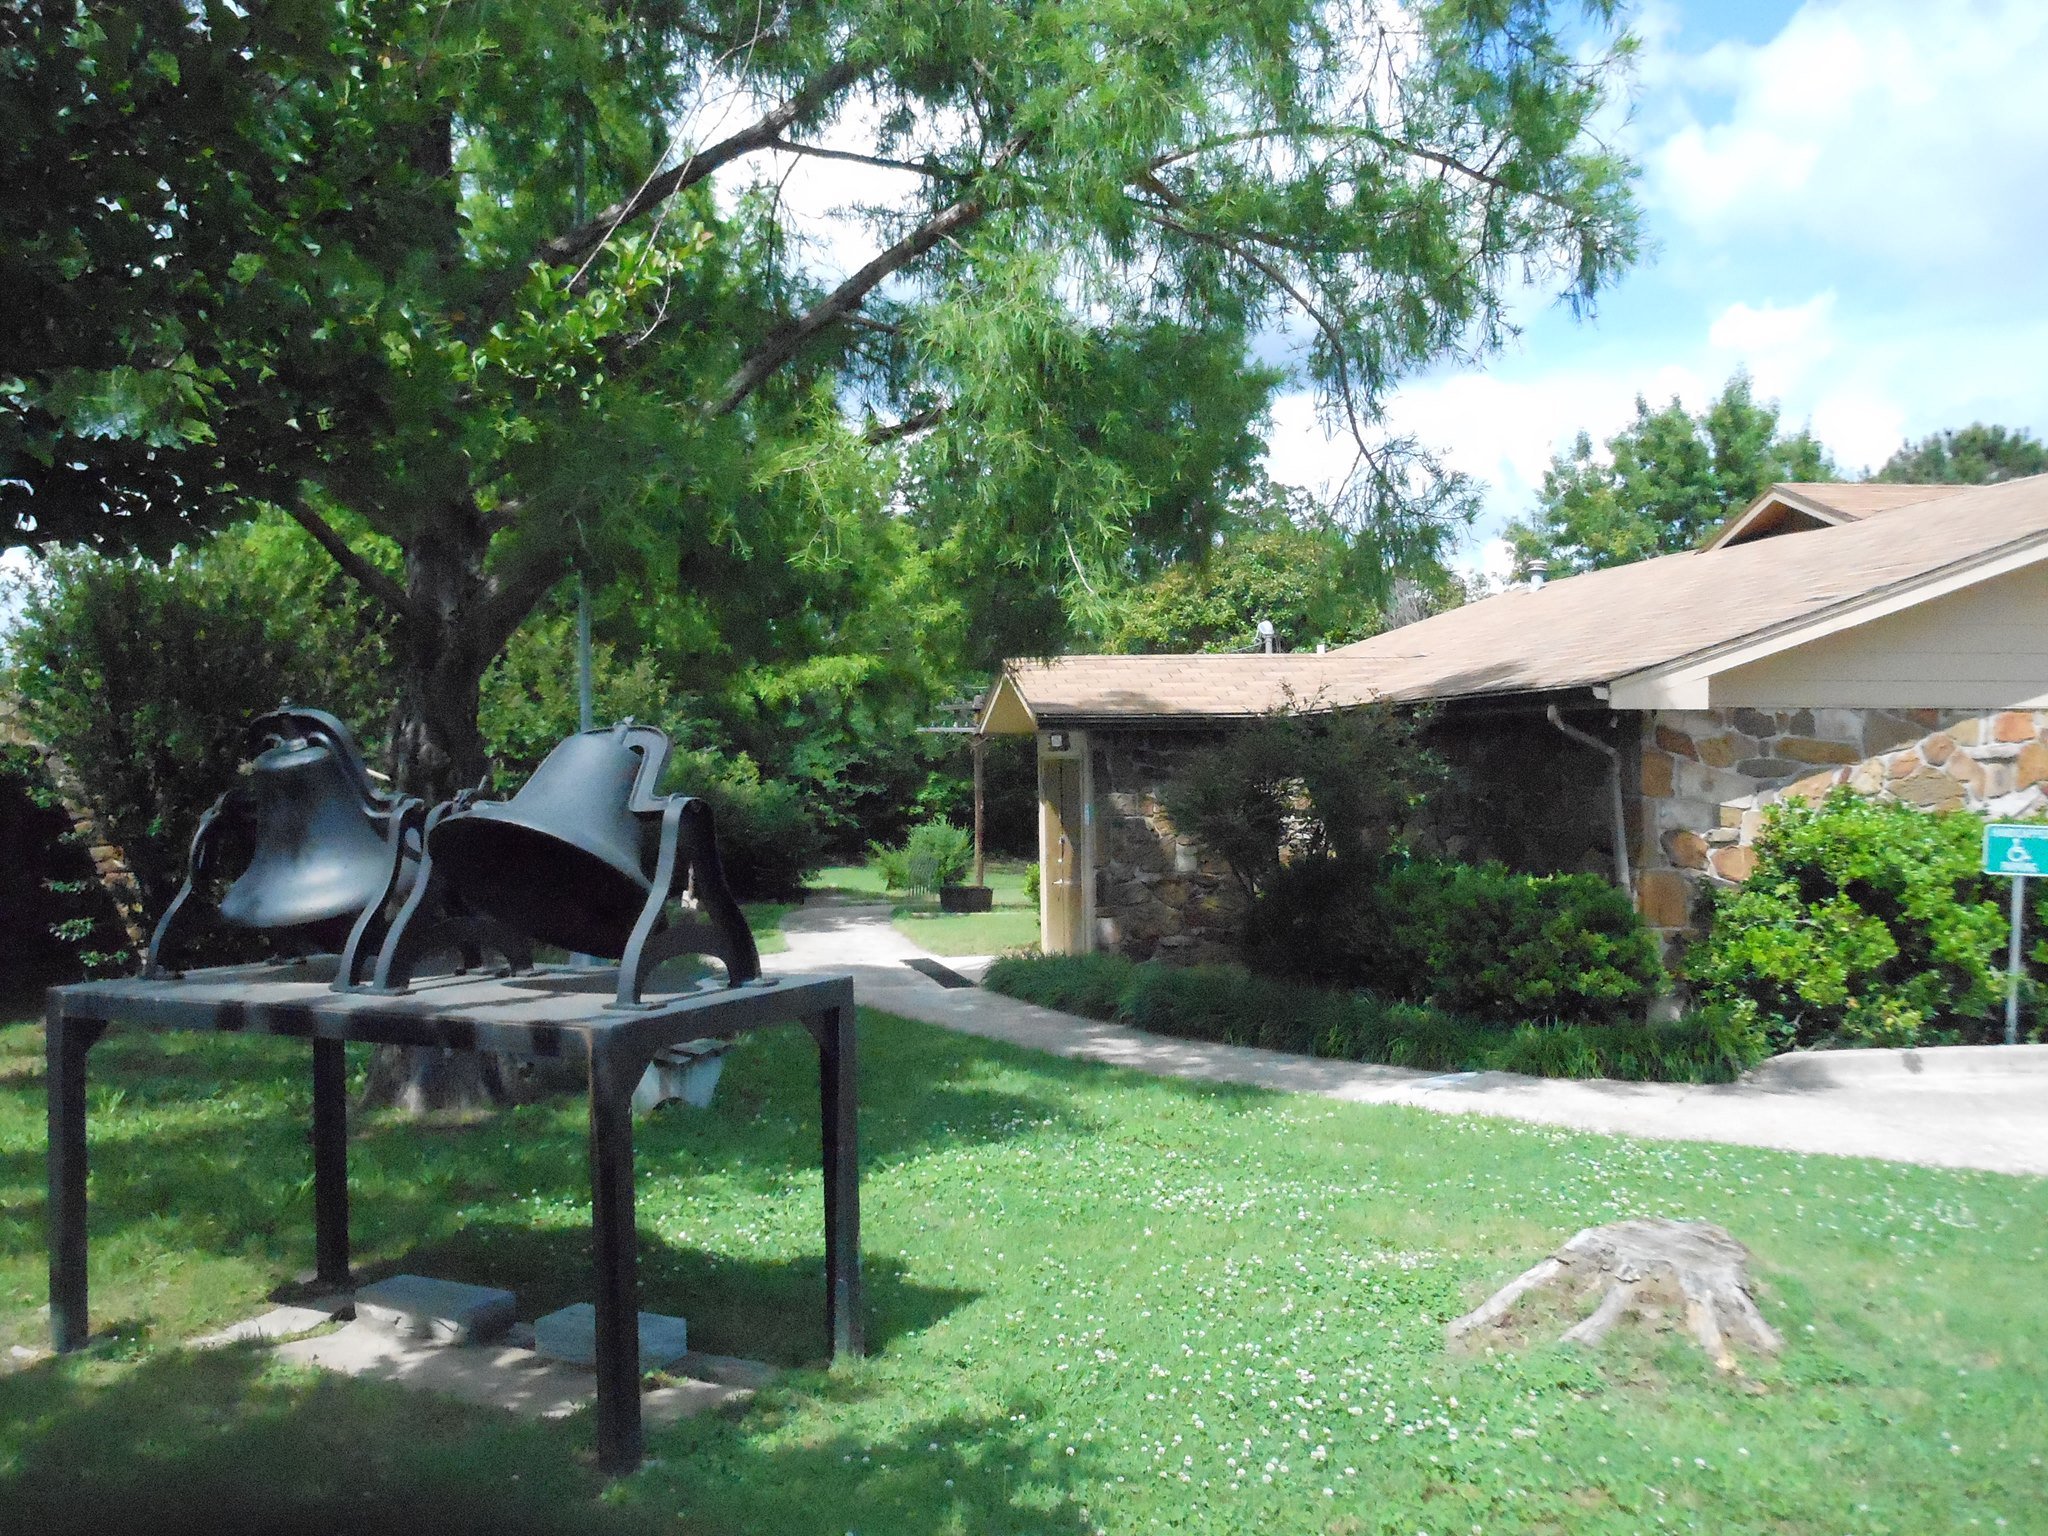 The Atoka Museum and Confederate cemetery are managed by the Atoka Historical Society. The Museum covers Civil War history in Oklahoma and the history of Atoka County.